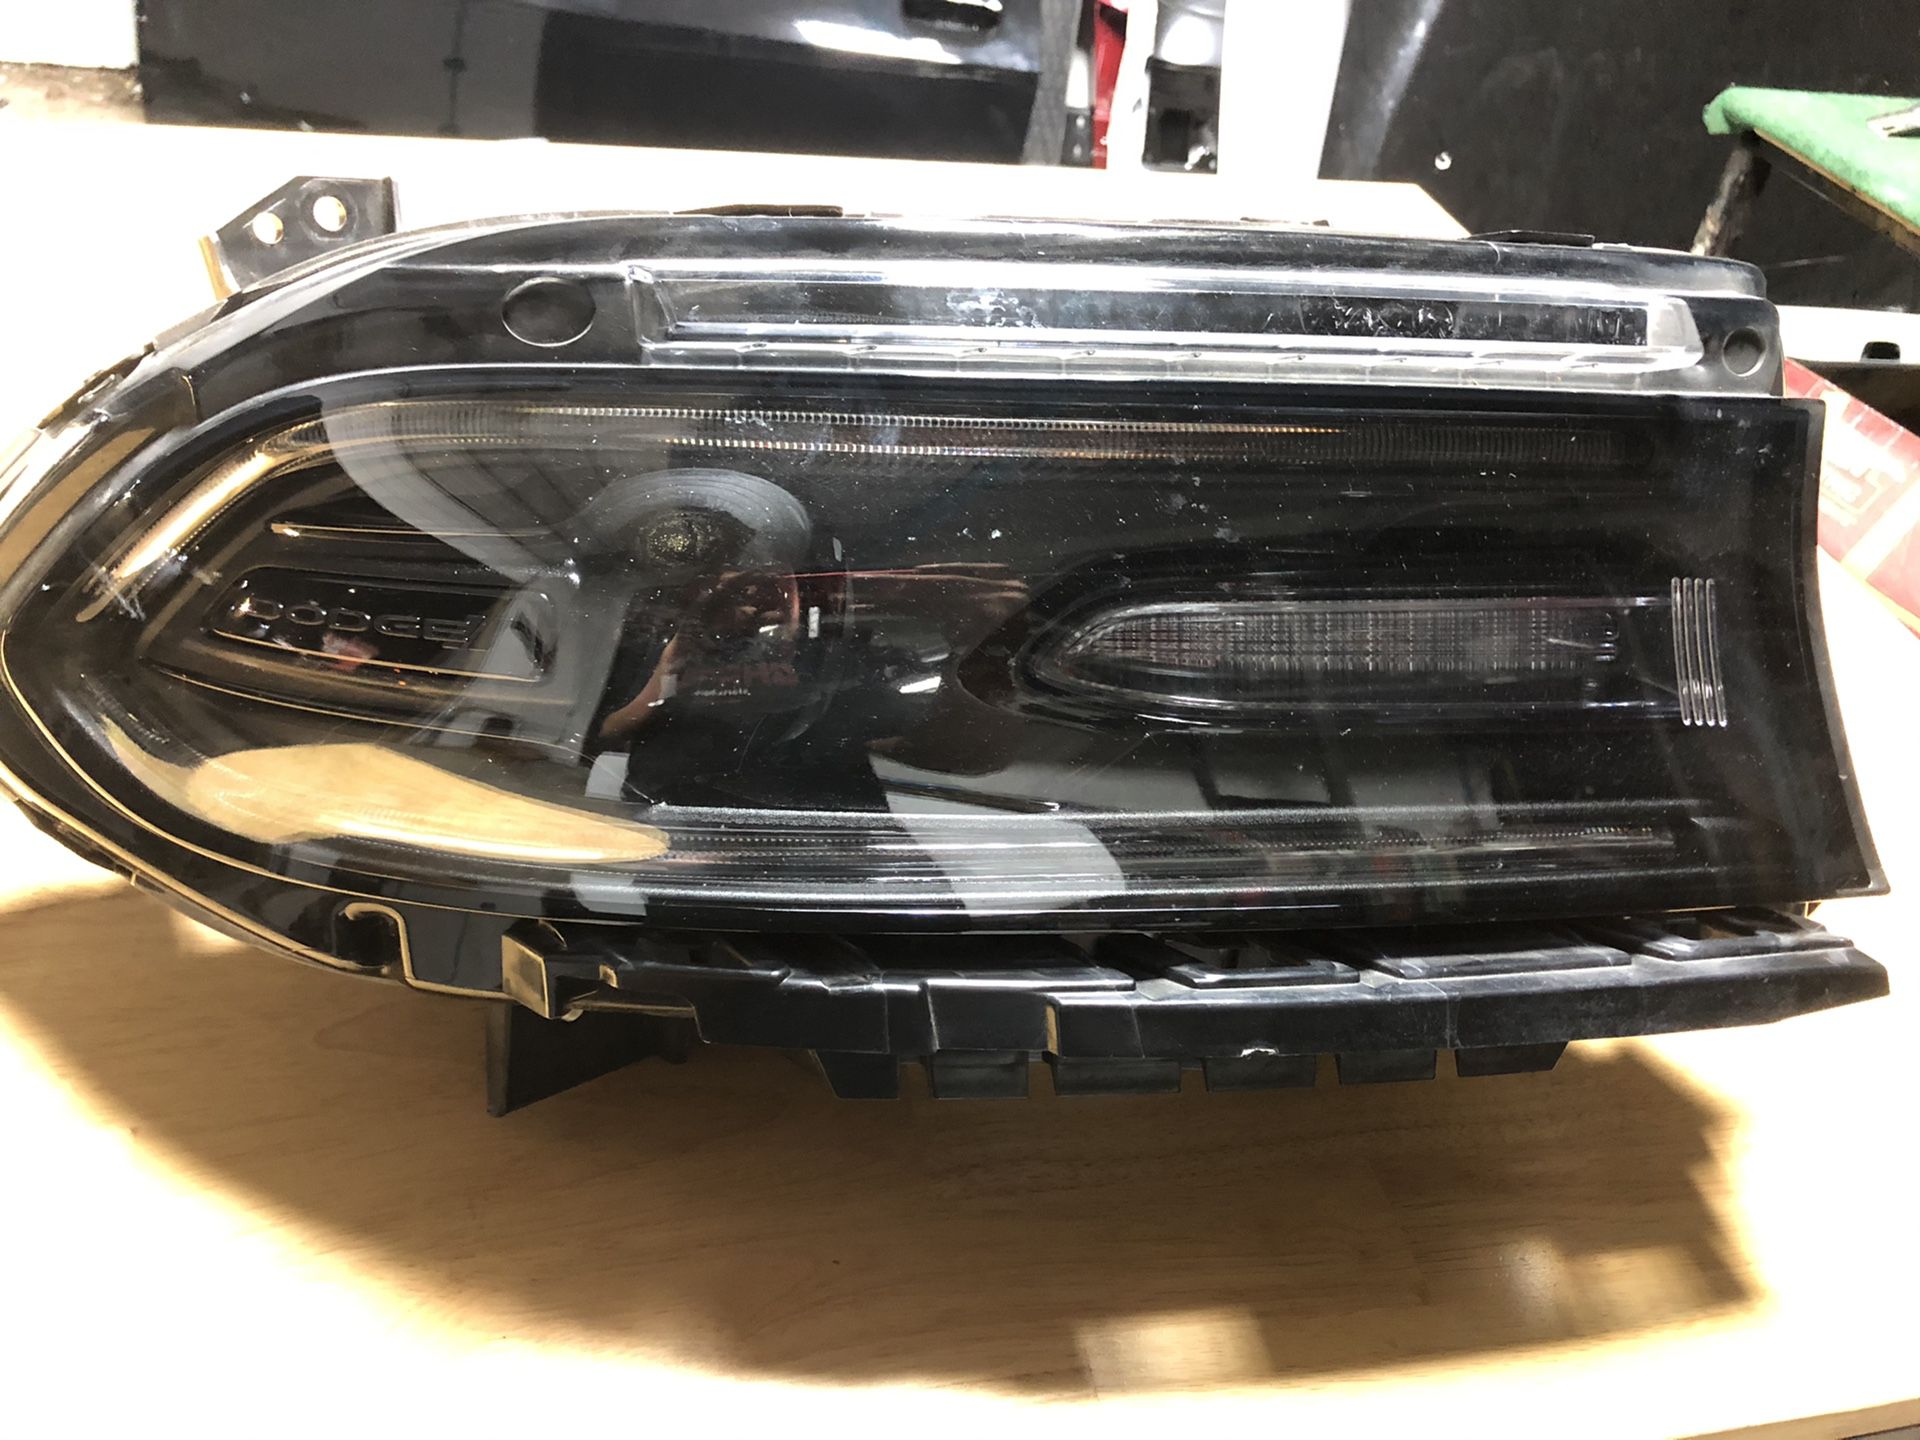 Charger headlight